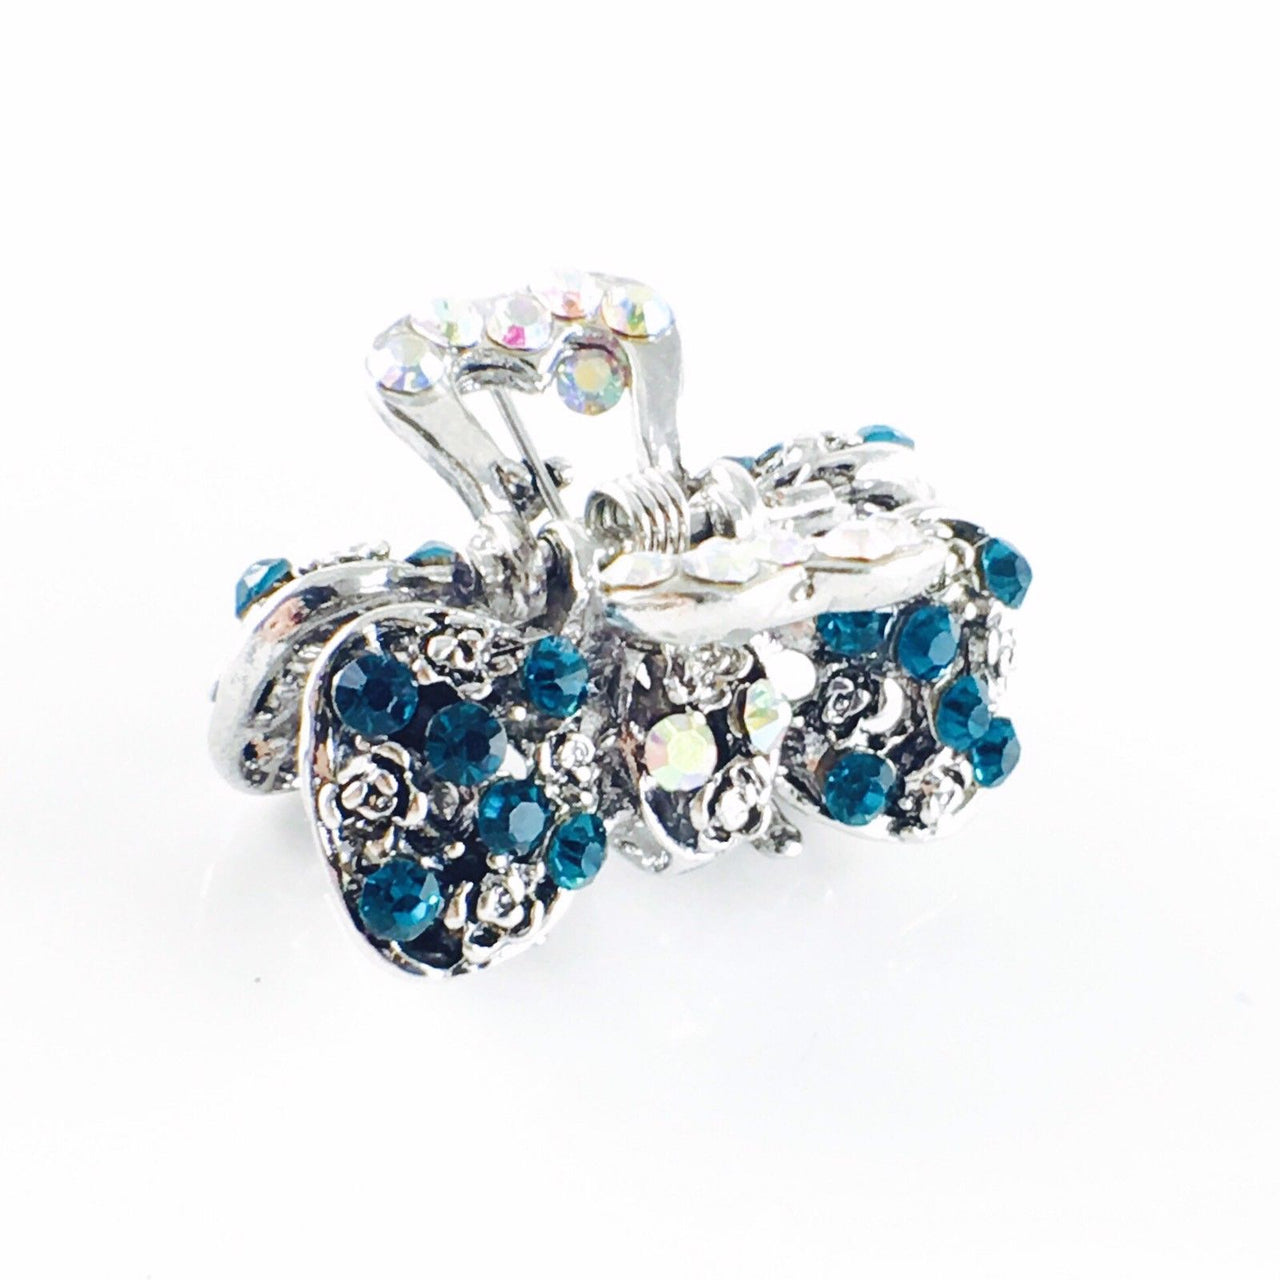 Roses Bow Knot Hair Claw Jaw Clip use Rhinestone Crystal Silver base Blue Zircon, Hair Claw - MOGHANT